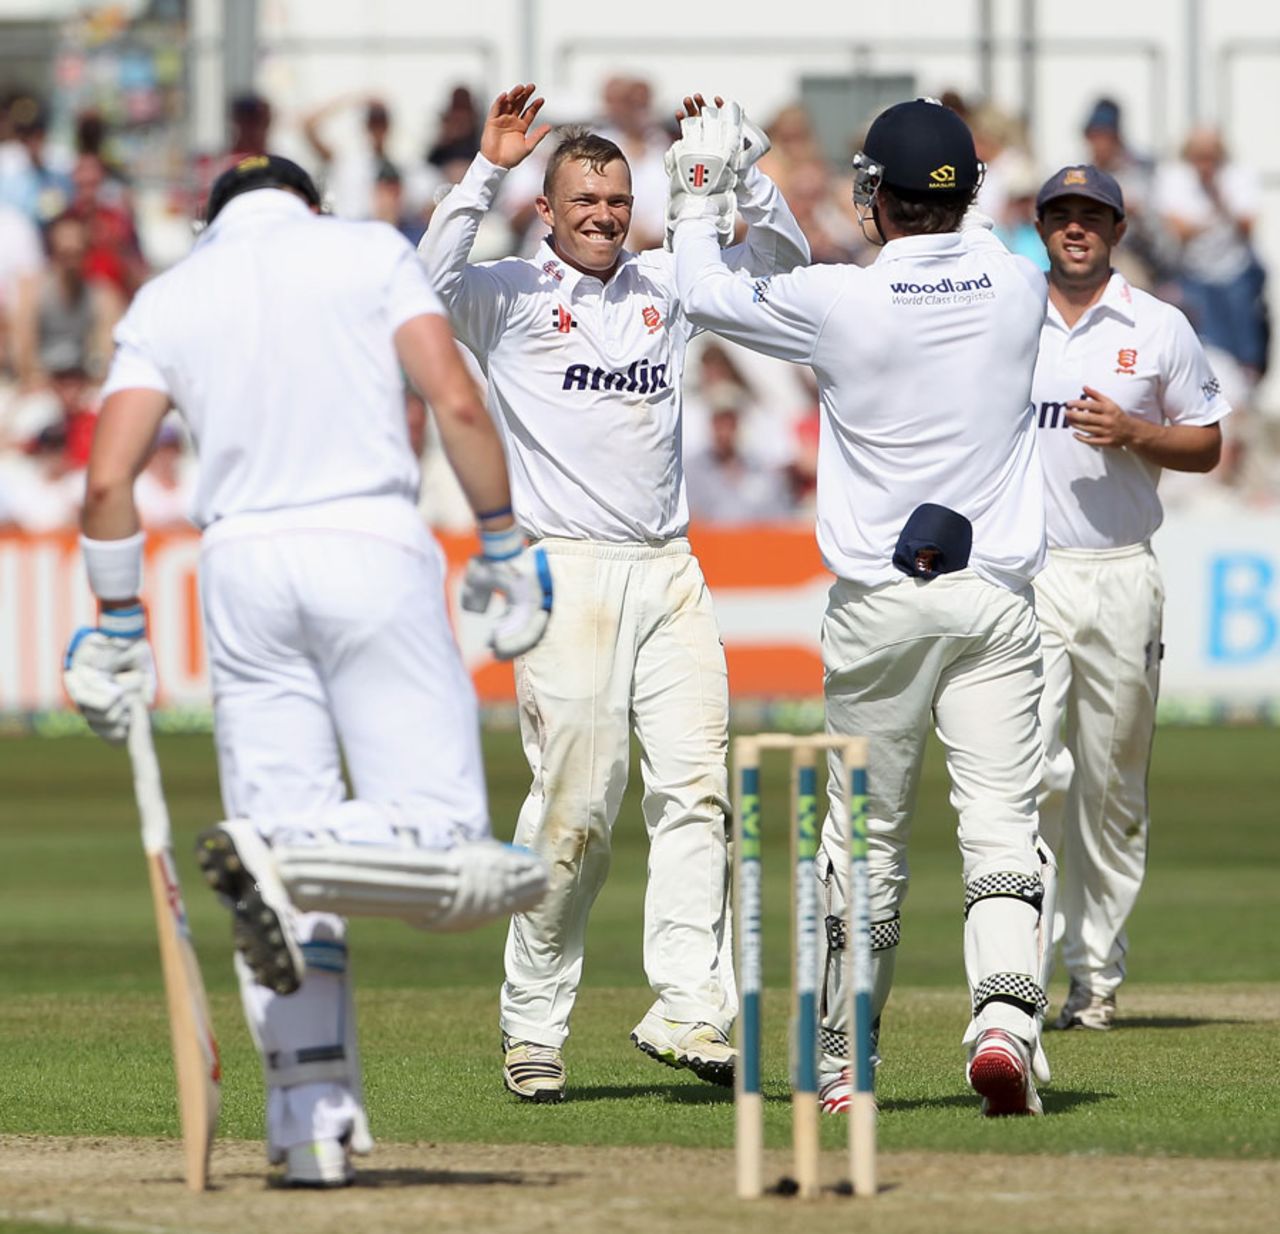 Tom Craddock's three wickets included that of Matt Prior, Essex v England, 1st day, Chelmsford, June 30, 2013